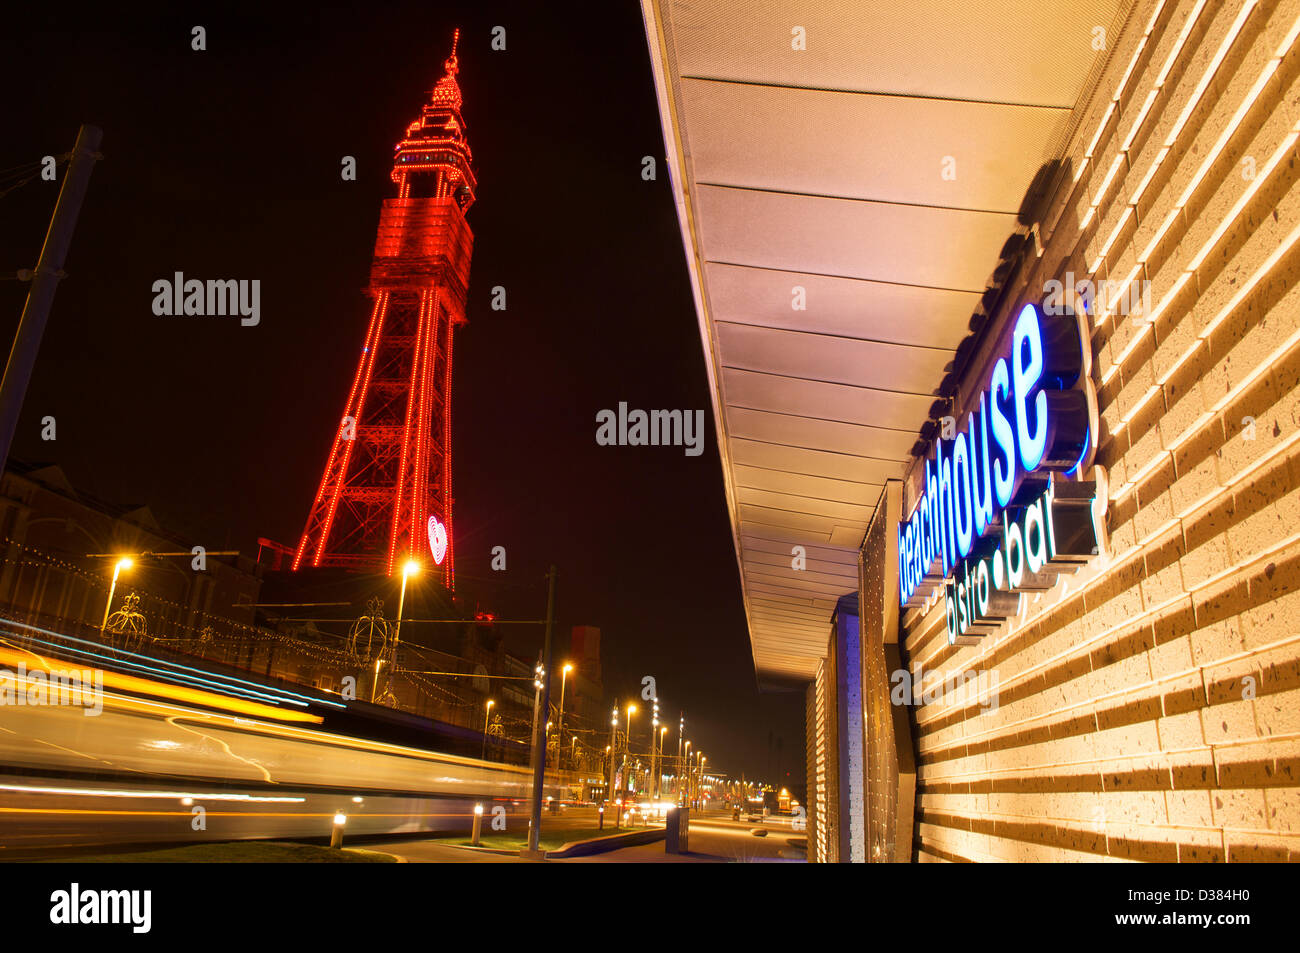 Blackpool,UK 12th Febuary 2013   The all new LED lighting on Blackpool tower is switched on for the first time after the legs have been in darkness for several years after major maintenance and refurbishment work was carried out.The iconic structure will shine bright red for the next few days to celebrate Valentine's day,Credit: kevin walsh / Alamy Live News Stock Photo